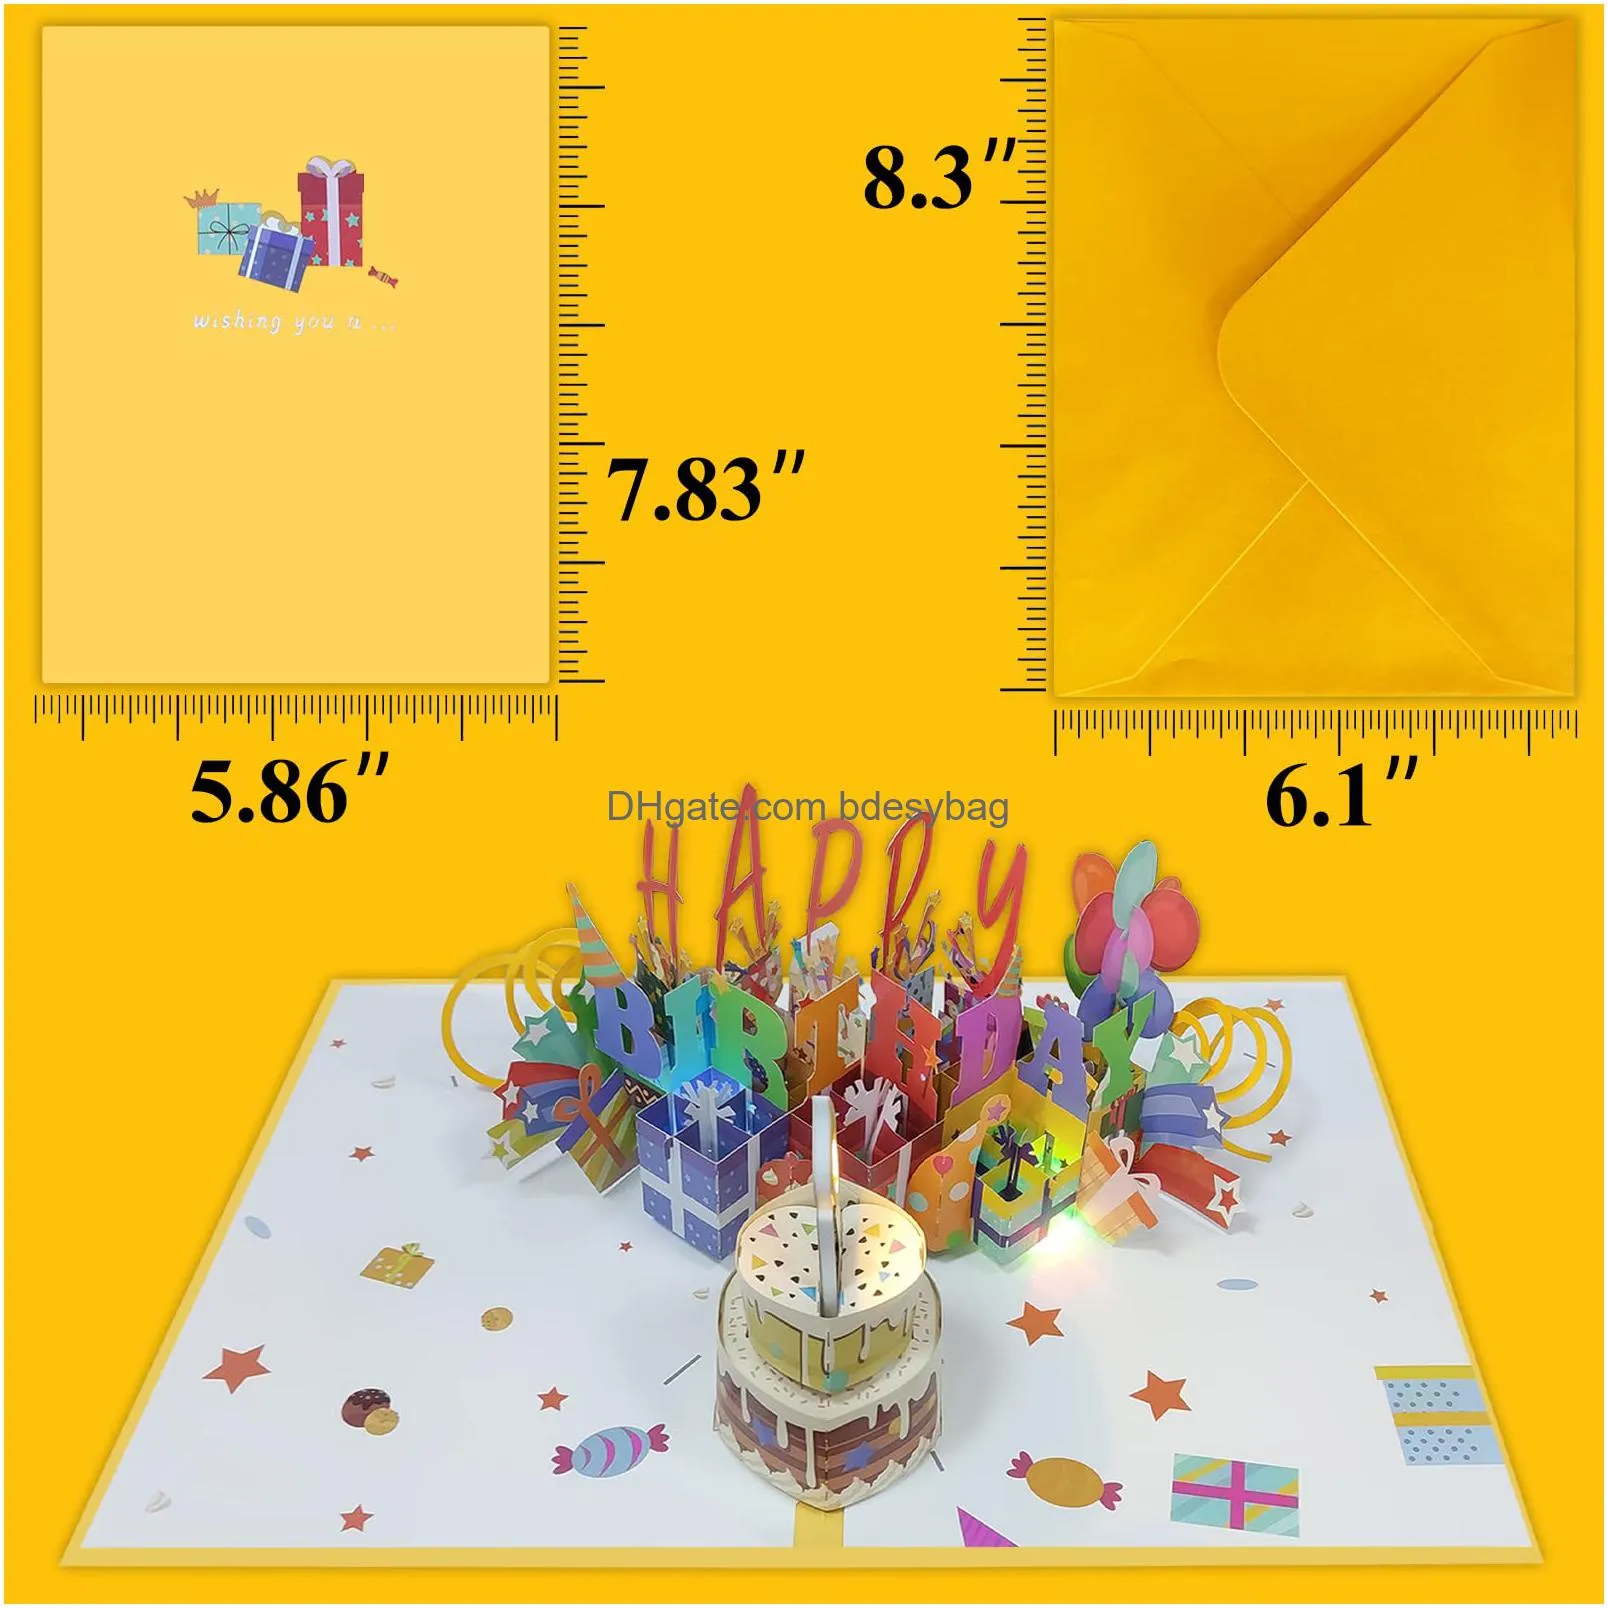 birthday card musical birthday cards with light and music blowable 3d birthday popup card birthday card for women plays hit song happy birthday